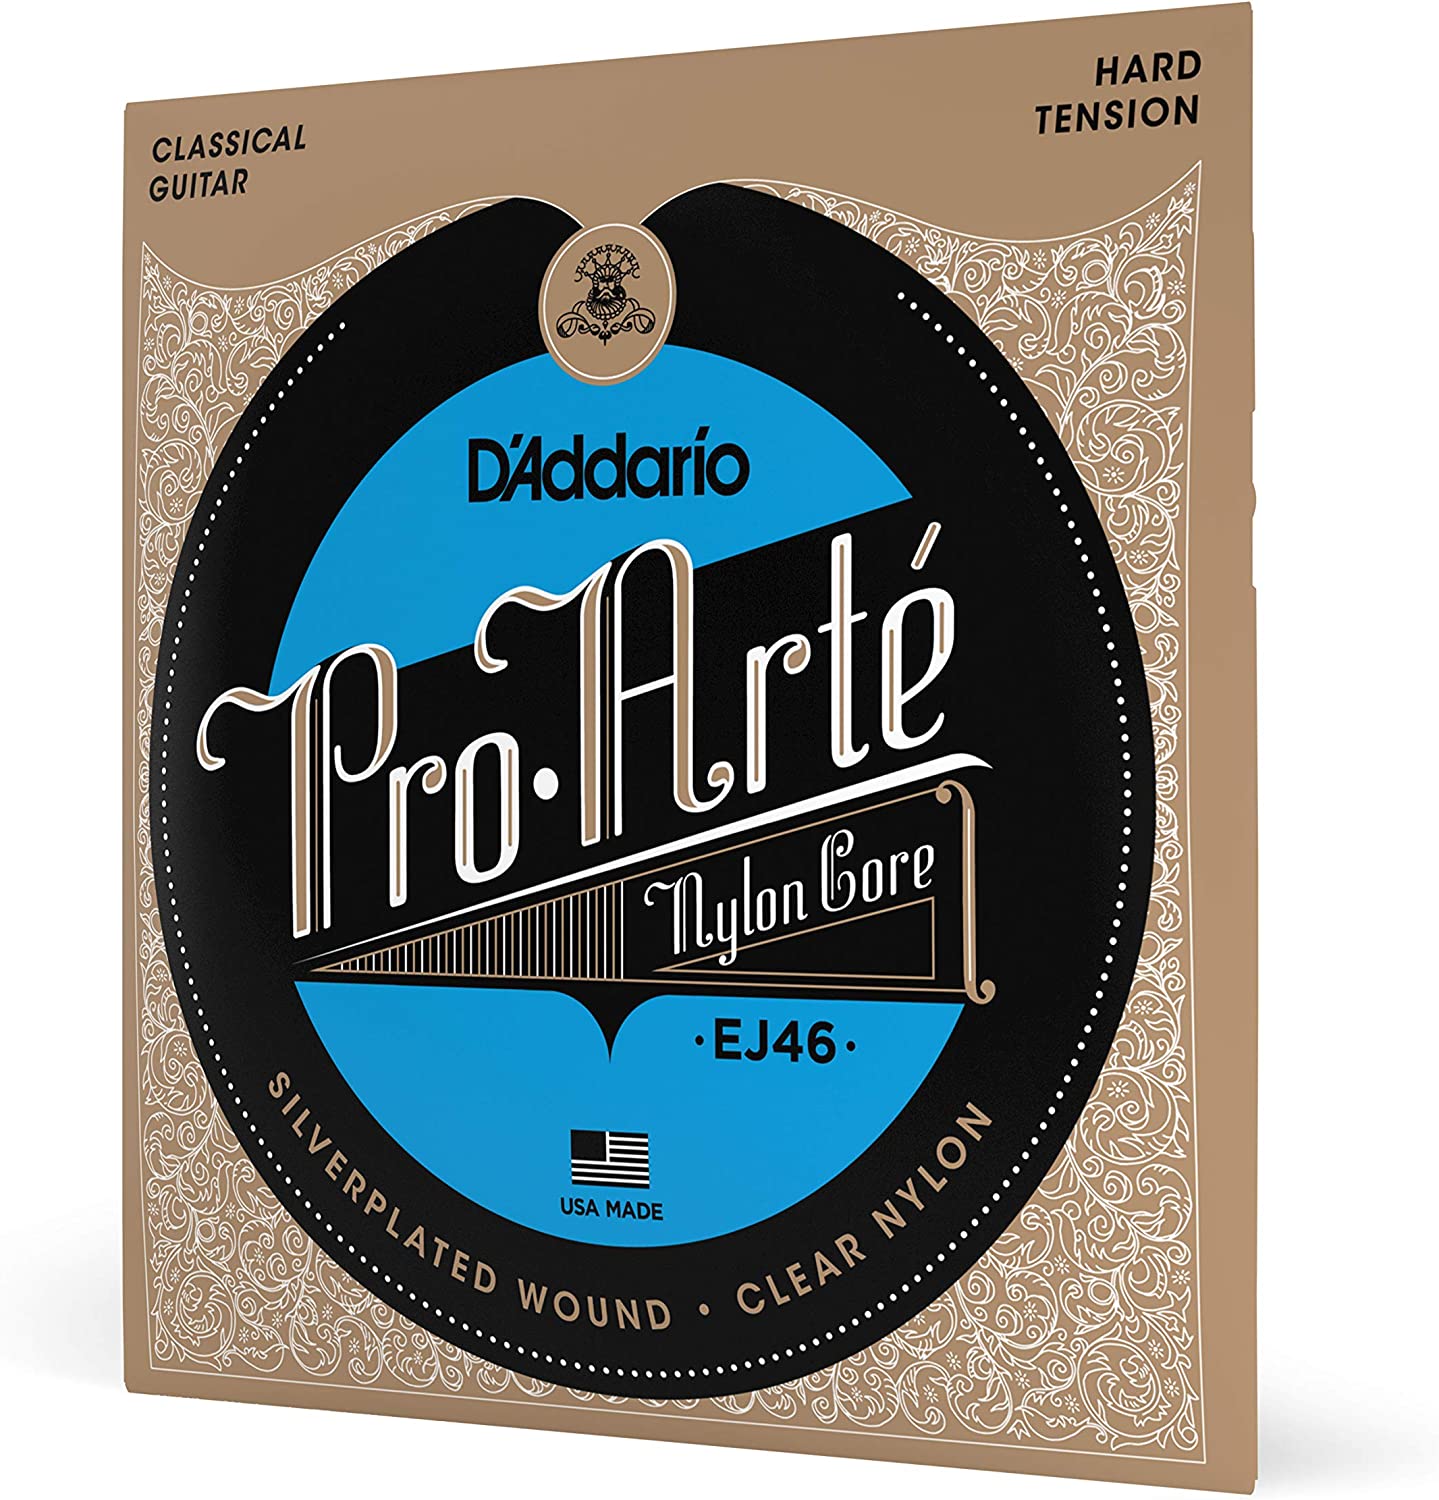 D’Addario EJ46 Pro-Arte Classical Guitar Strings on a white background